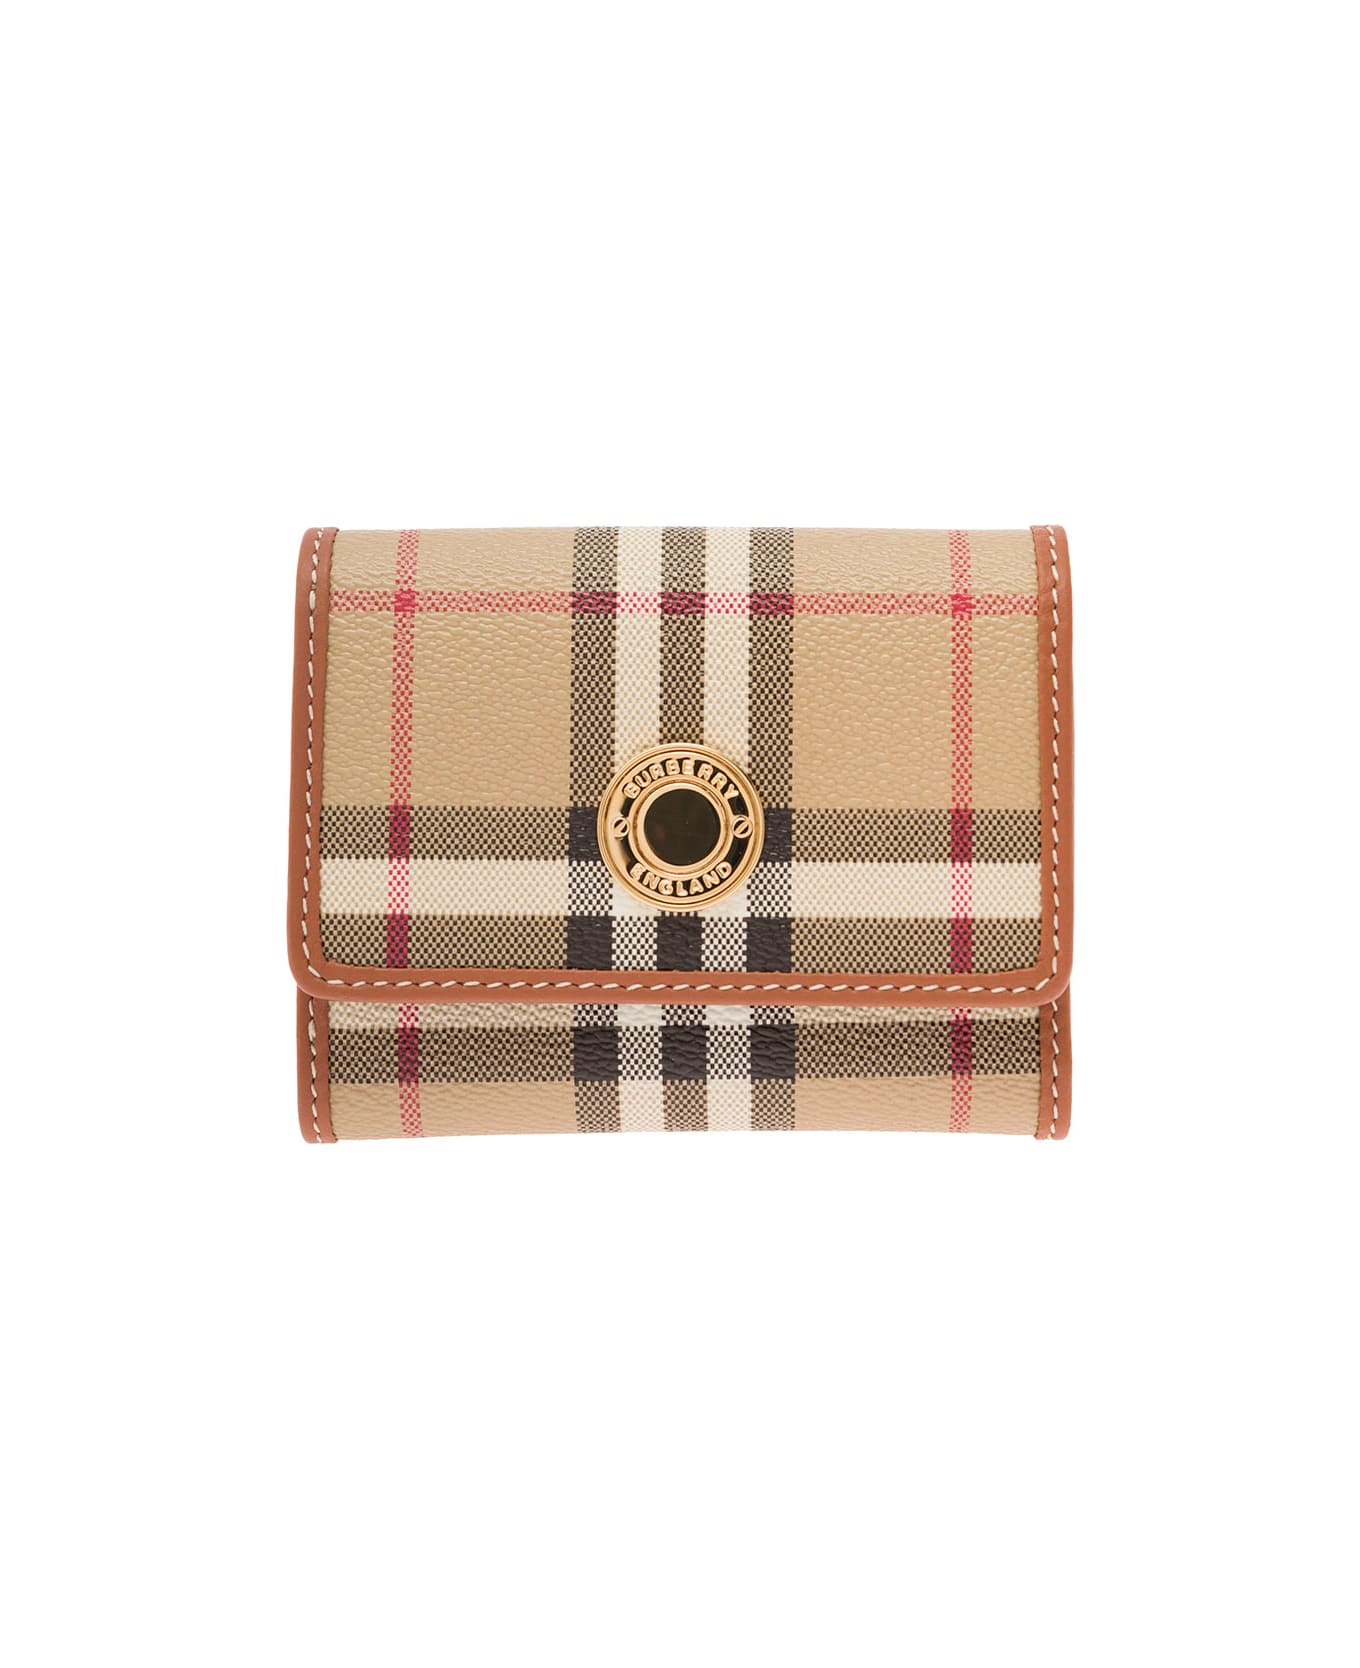 Burberry Leather And Check Wallet - Beige 財布